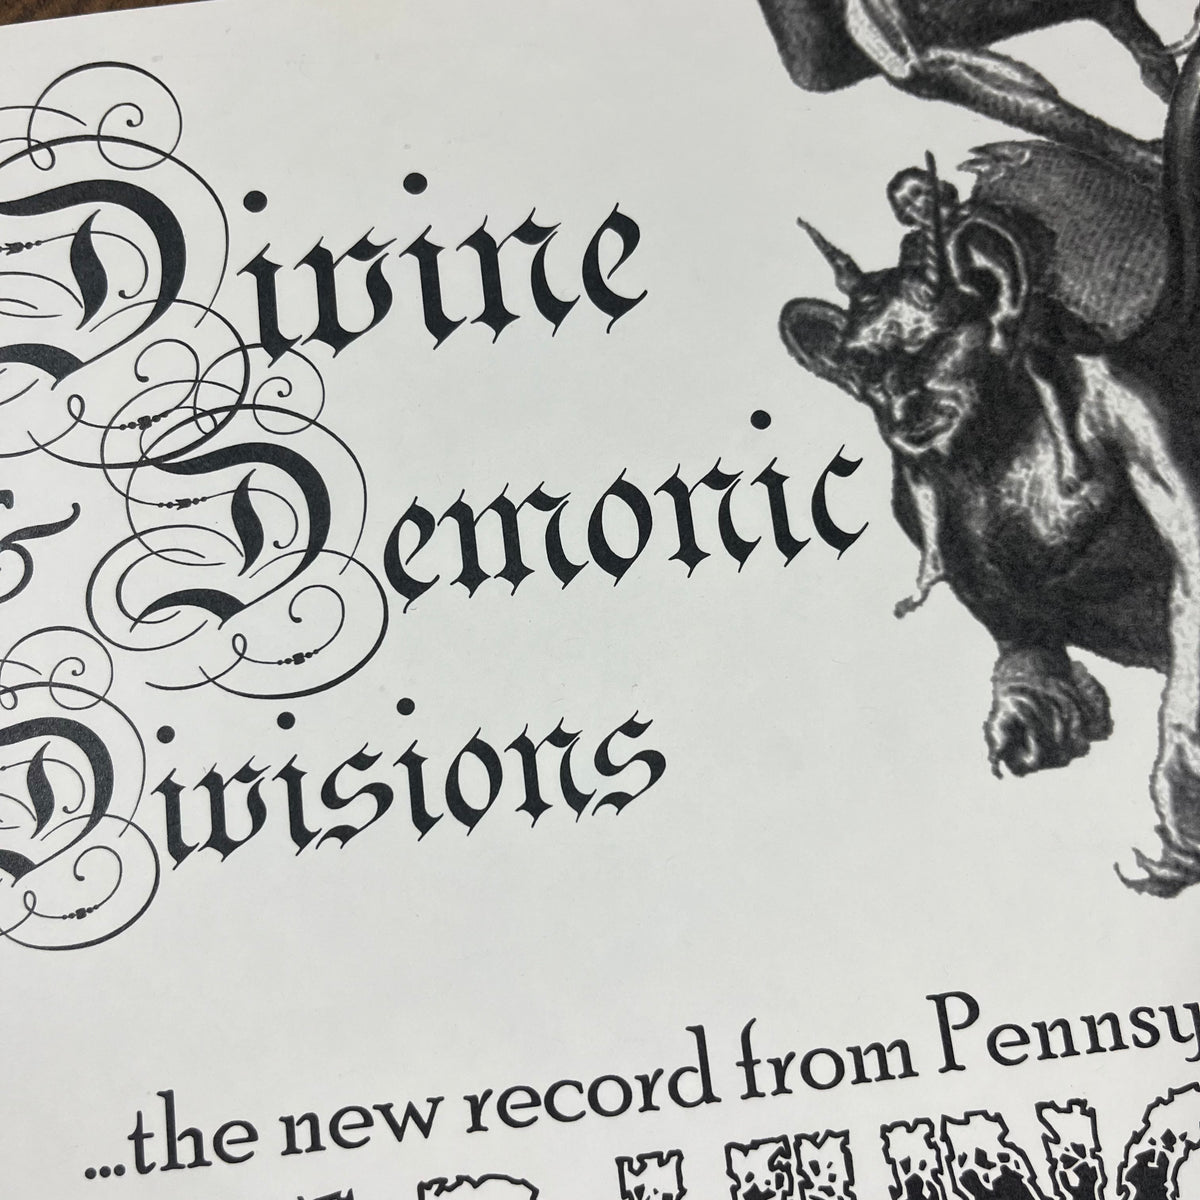 Vintage War Hungry &quot;Divine &amp; Demonic Divisions&quot; Brain Grenade Records Promo Poster